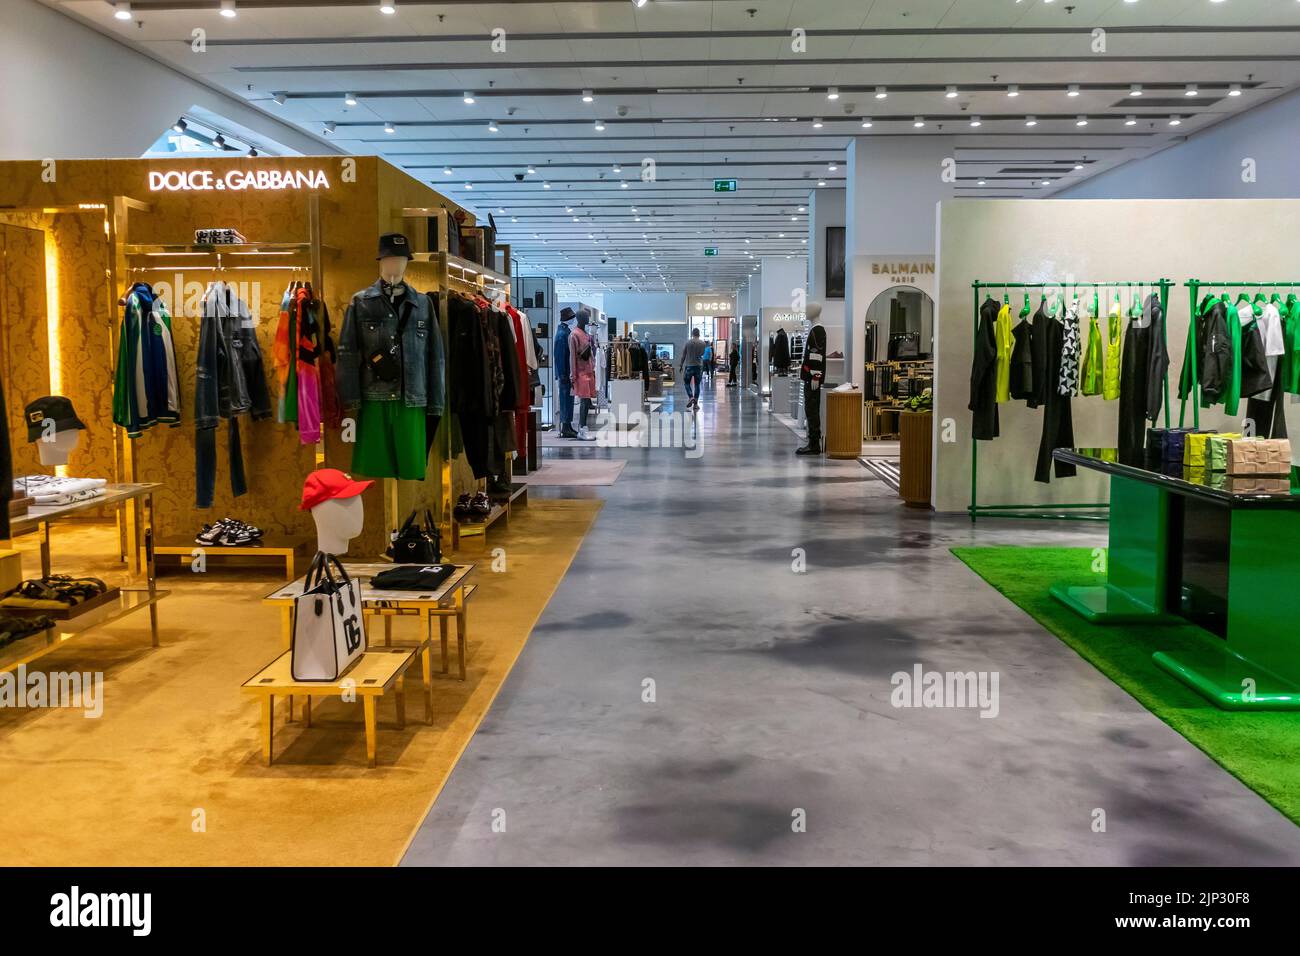 Clothes shop: Louis Vuitton nearby Warsaw in Poland: 2 reviews